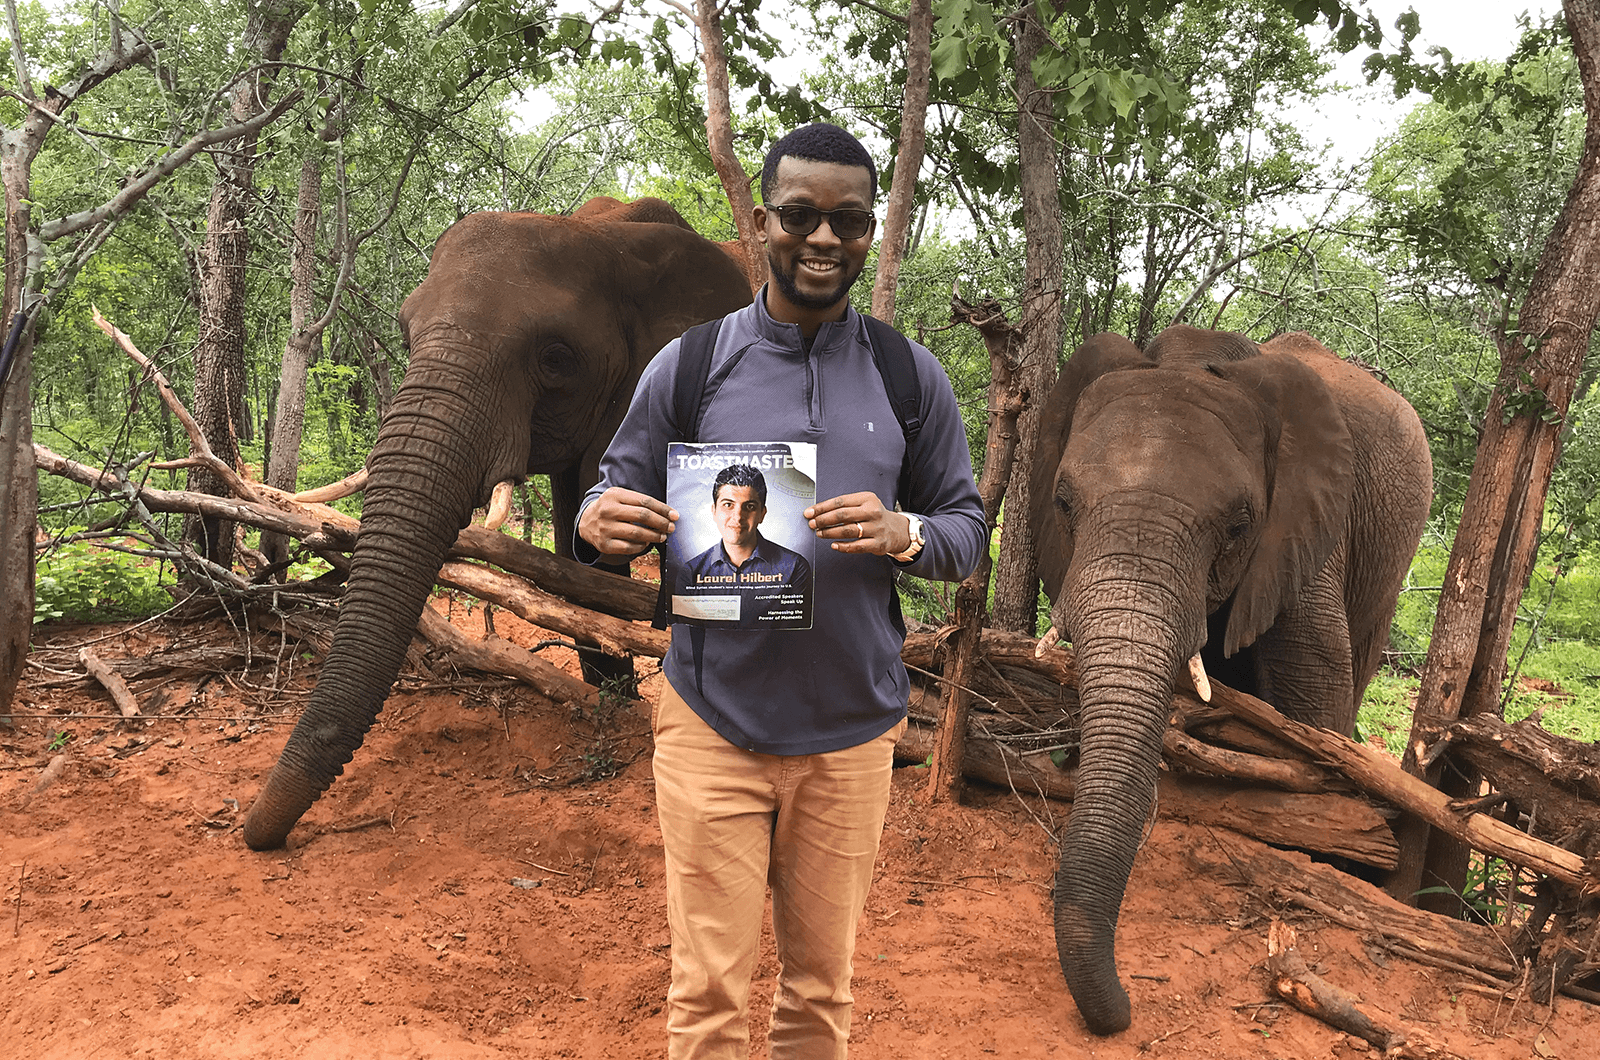 Gregory Gabriel, CC, from West Palm Beach, Florida, poses with elephants at the Wild Horizon Elephant Sanctuary at Victoria Falls National Park in Zimbabwe.